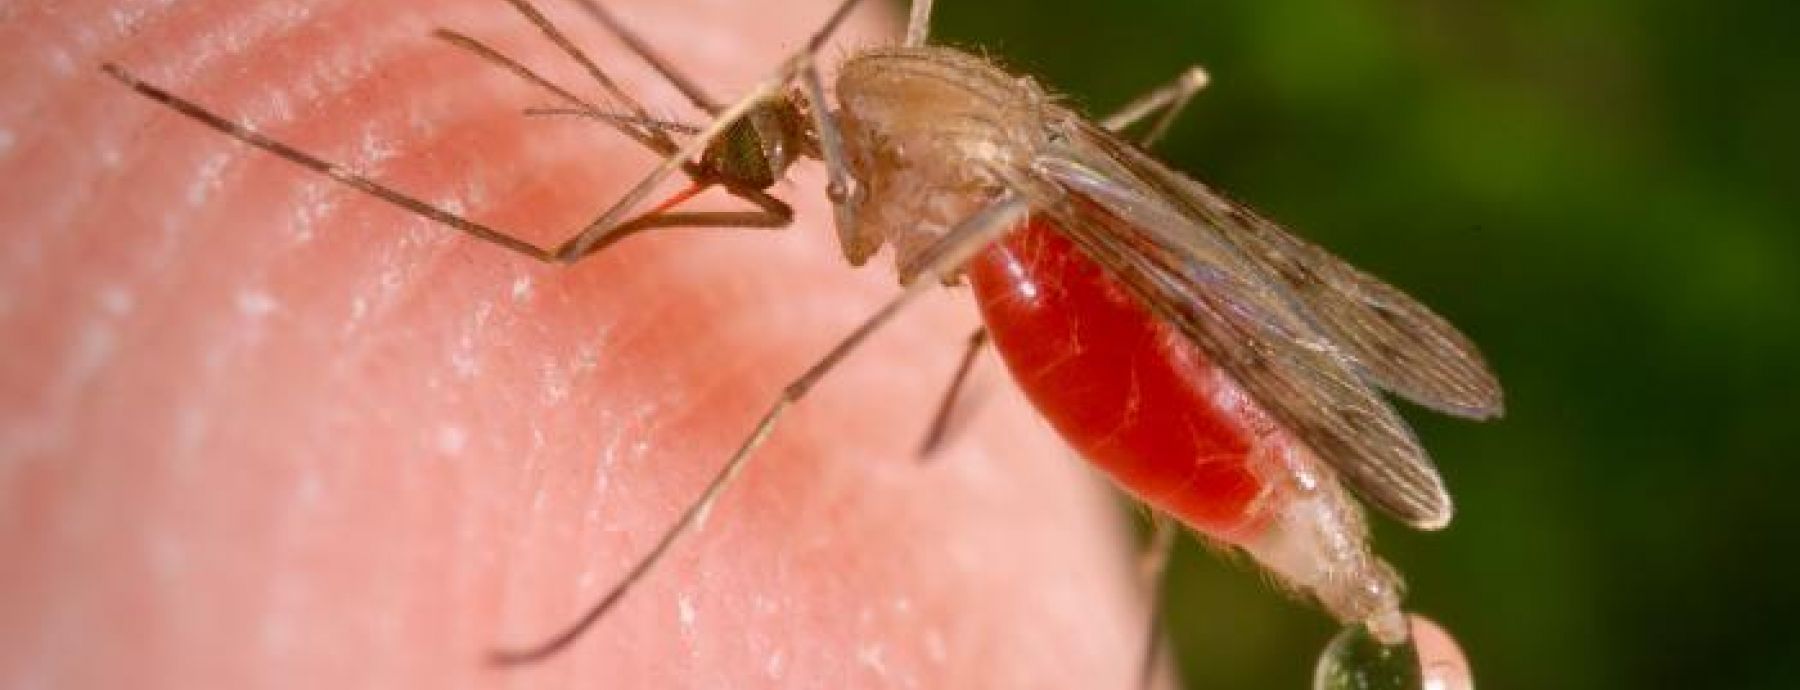 Targeted insecticides could reduce malaria